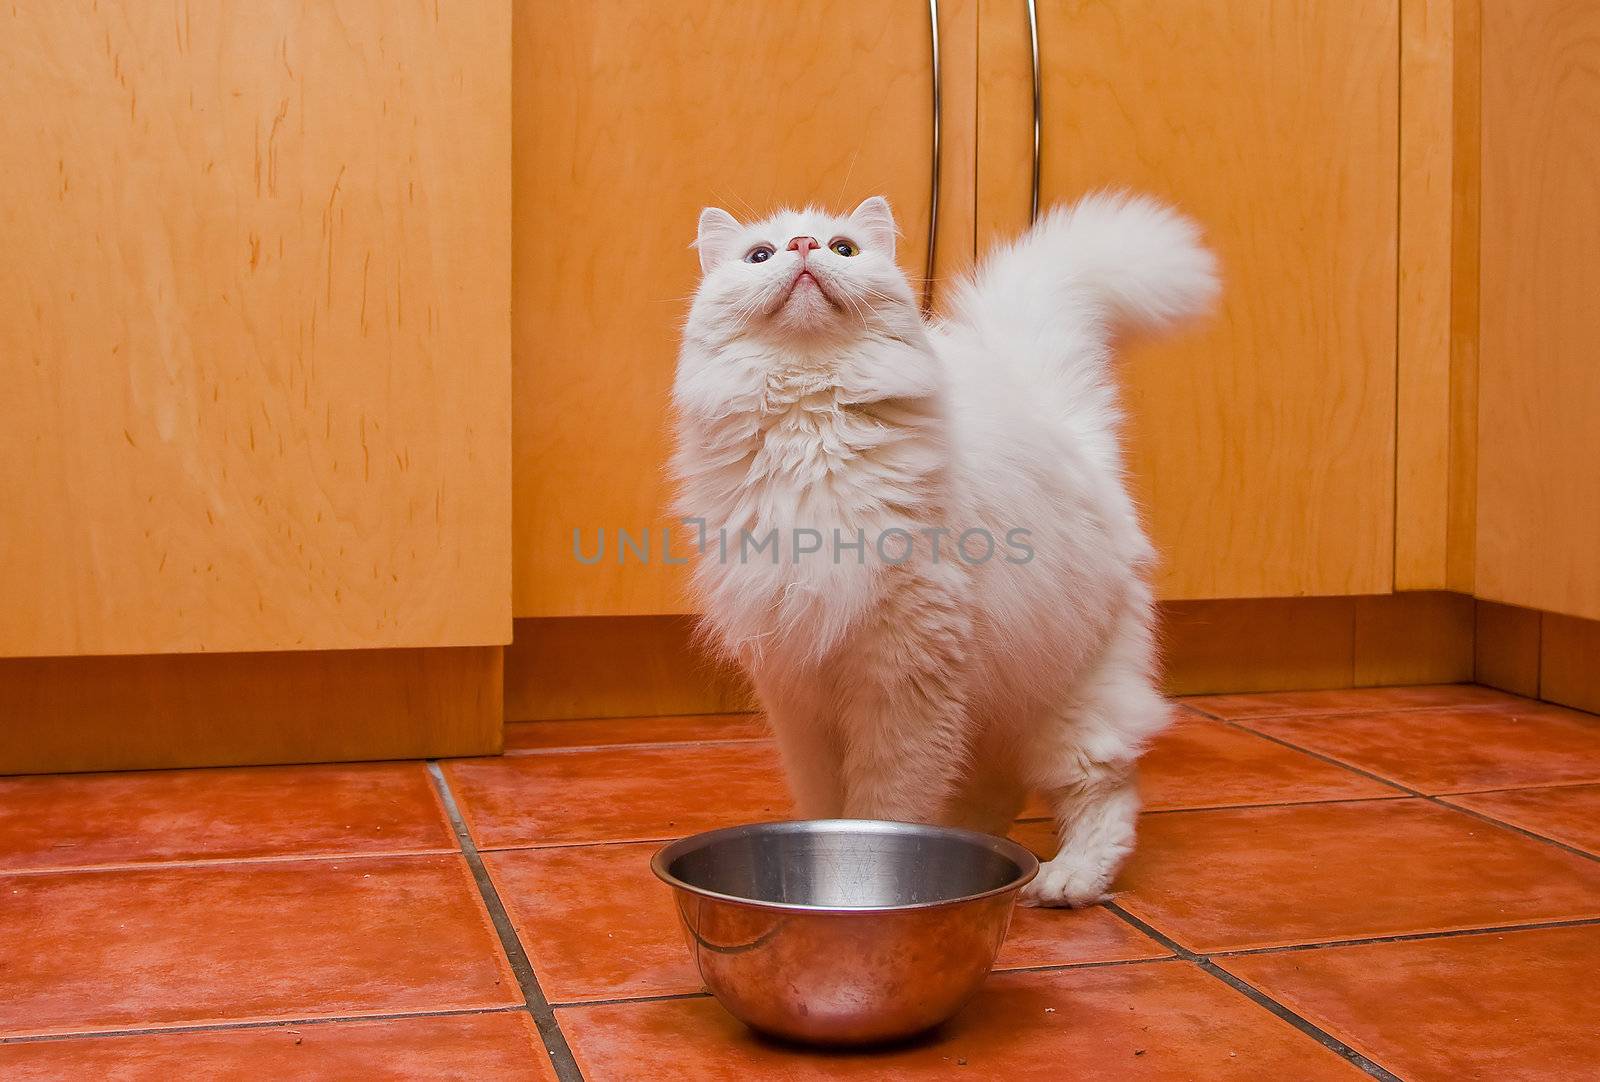 A white cat with medium long hair, like a Persian or Ragamuffin breed, elegantly waiting to be fed in the kitchen